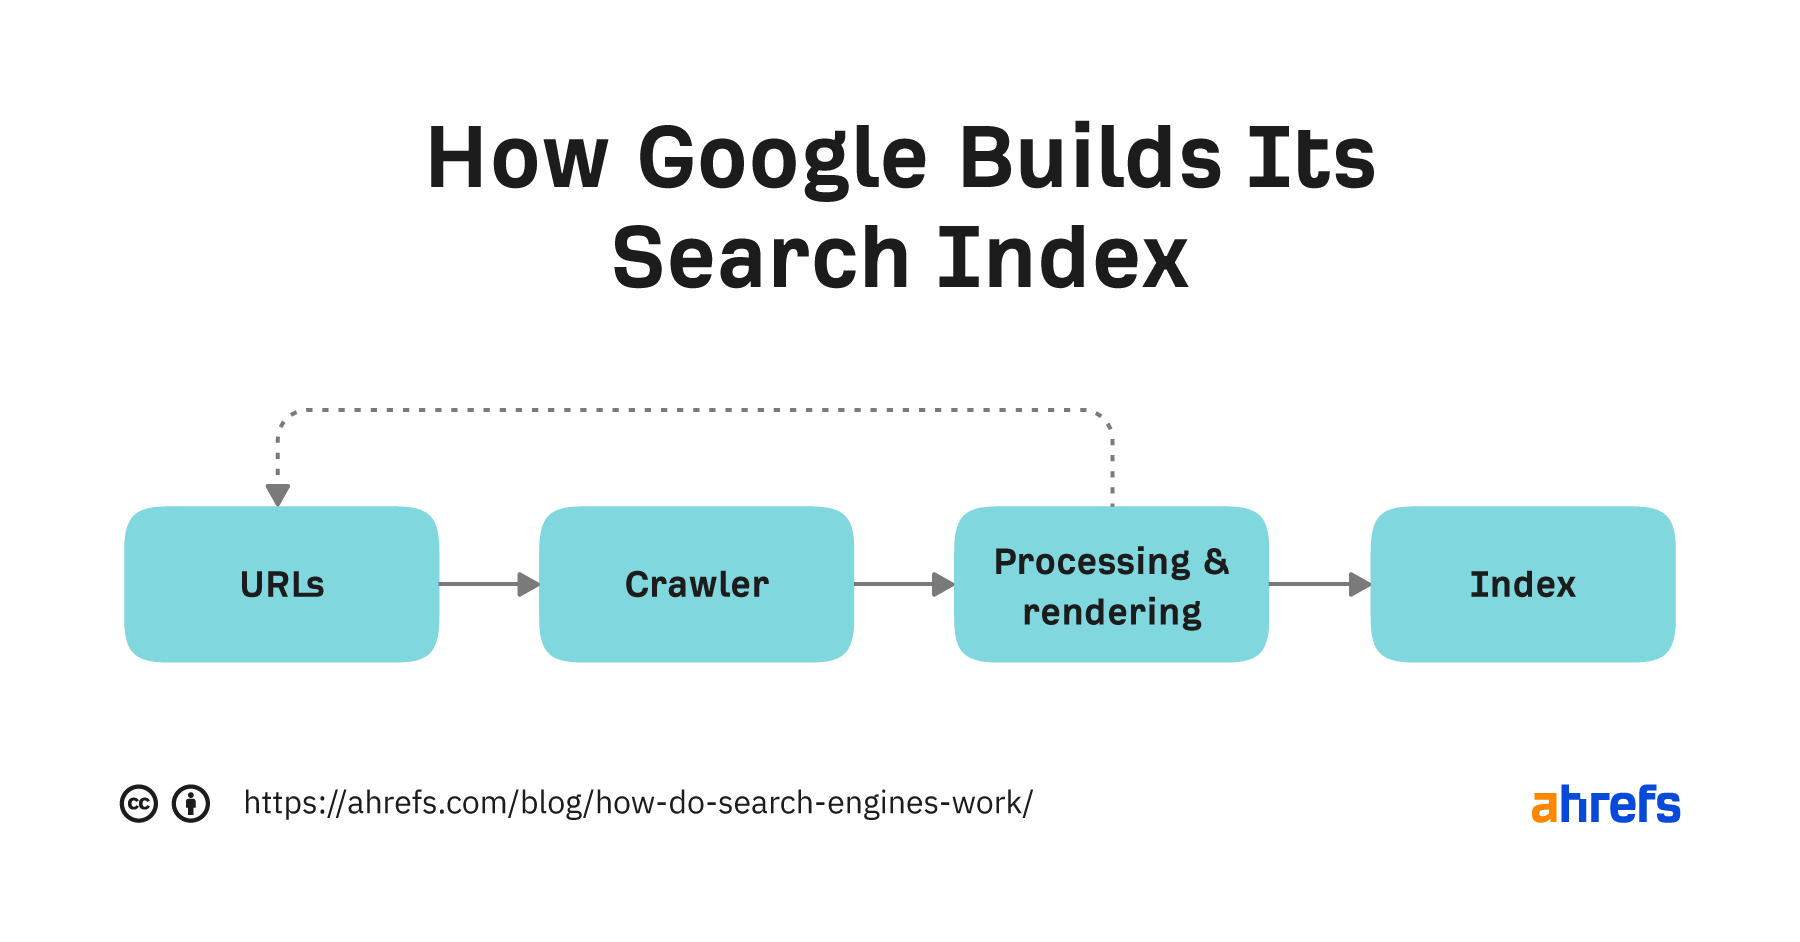 How Google builds its index